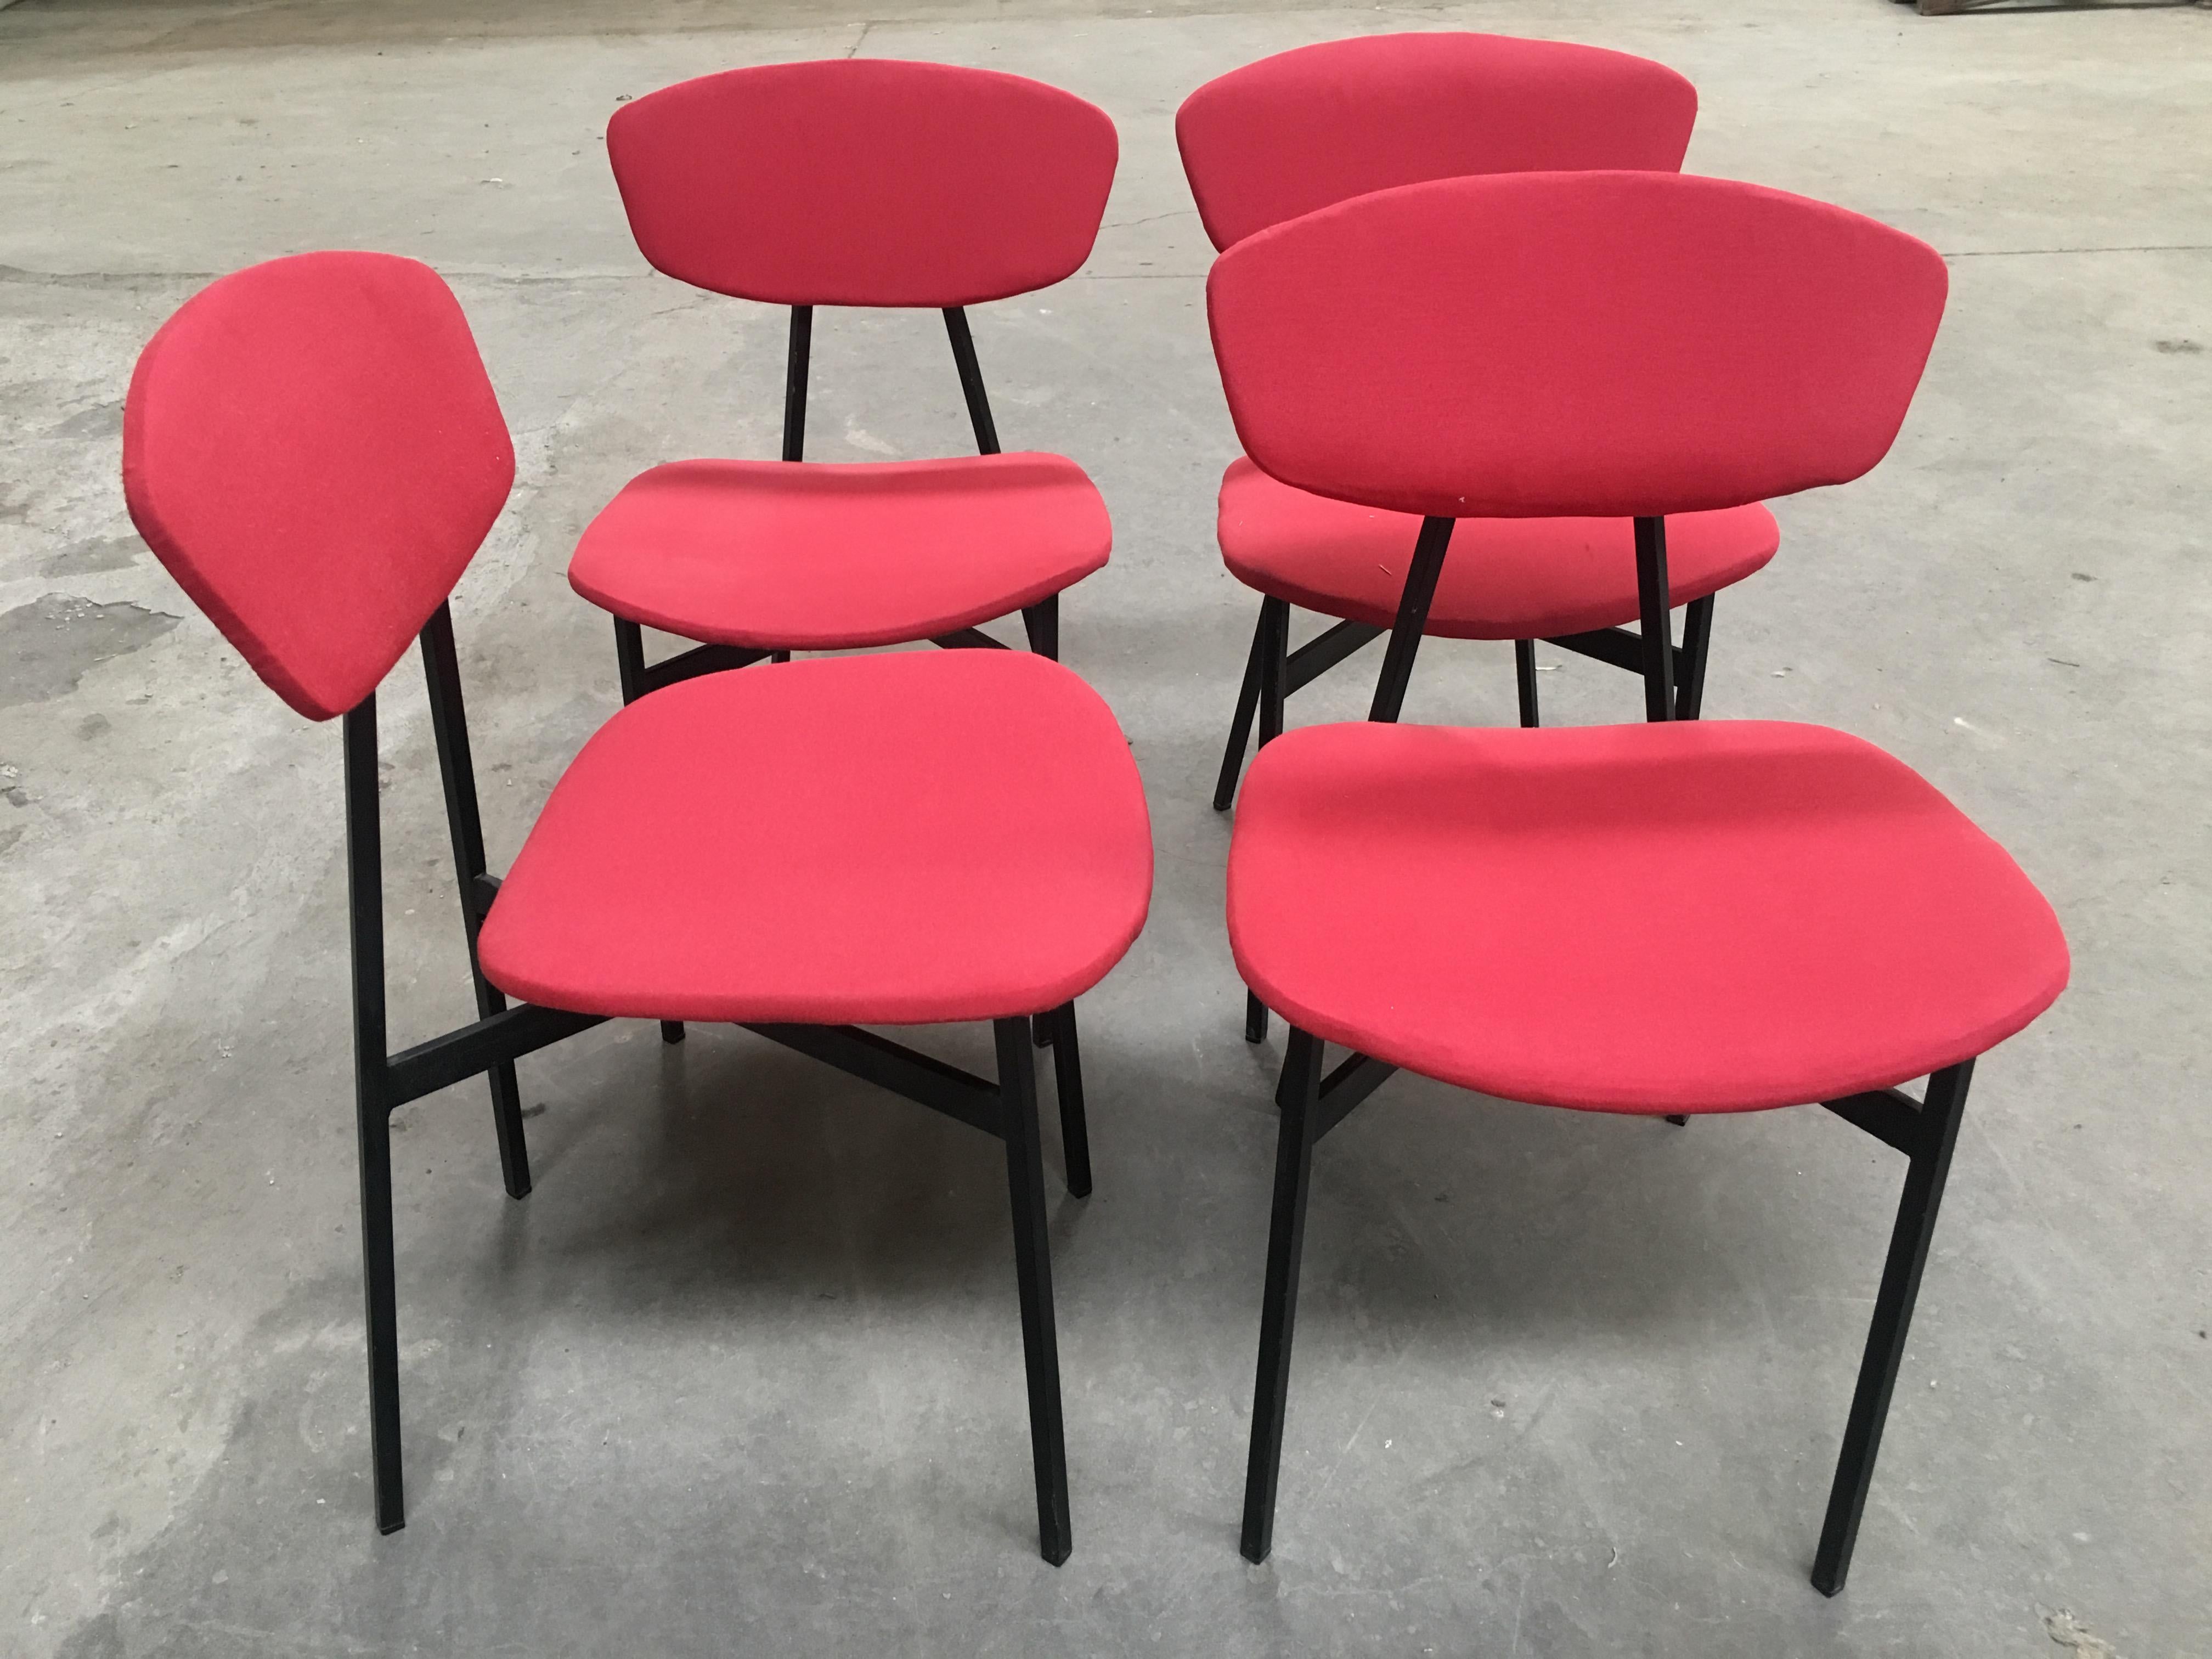 Lacquered Mid-Century Modern Italian Set of Four Dining Upholstered Chairs, 1960s For Sale